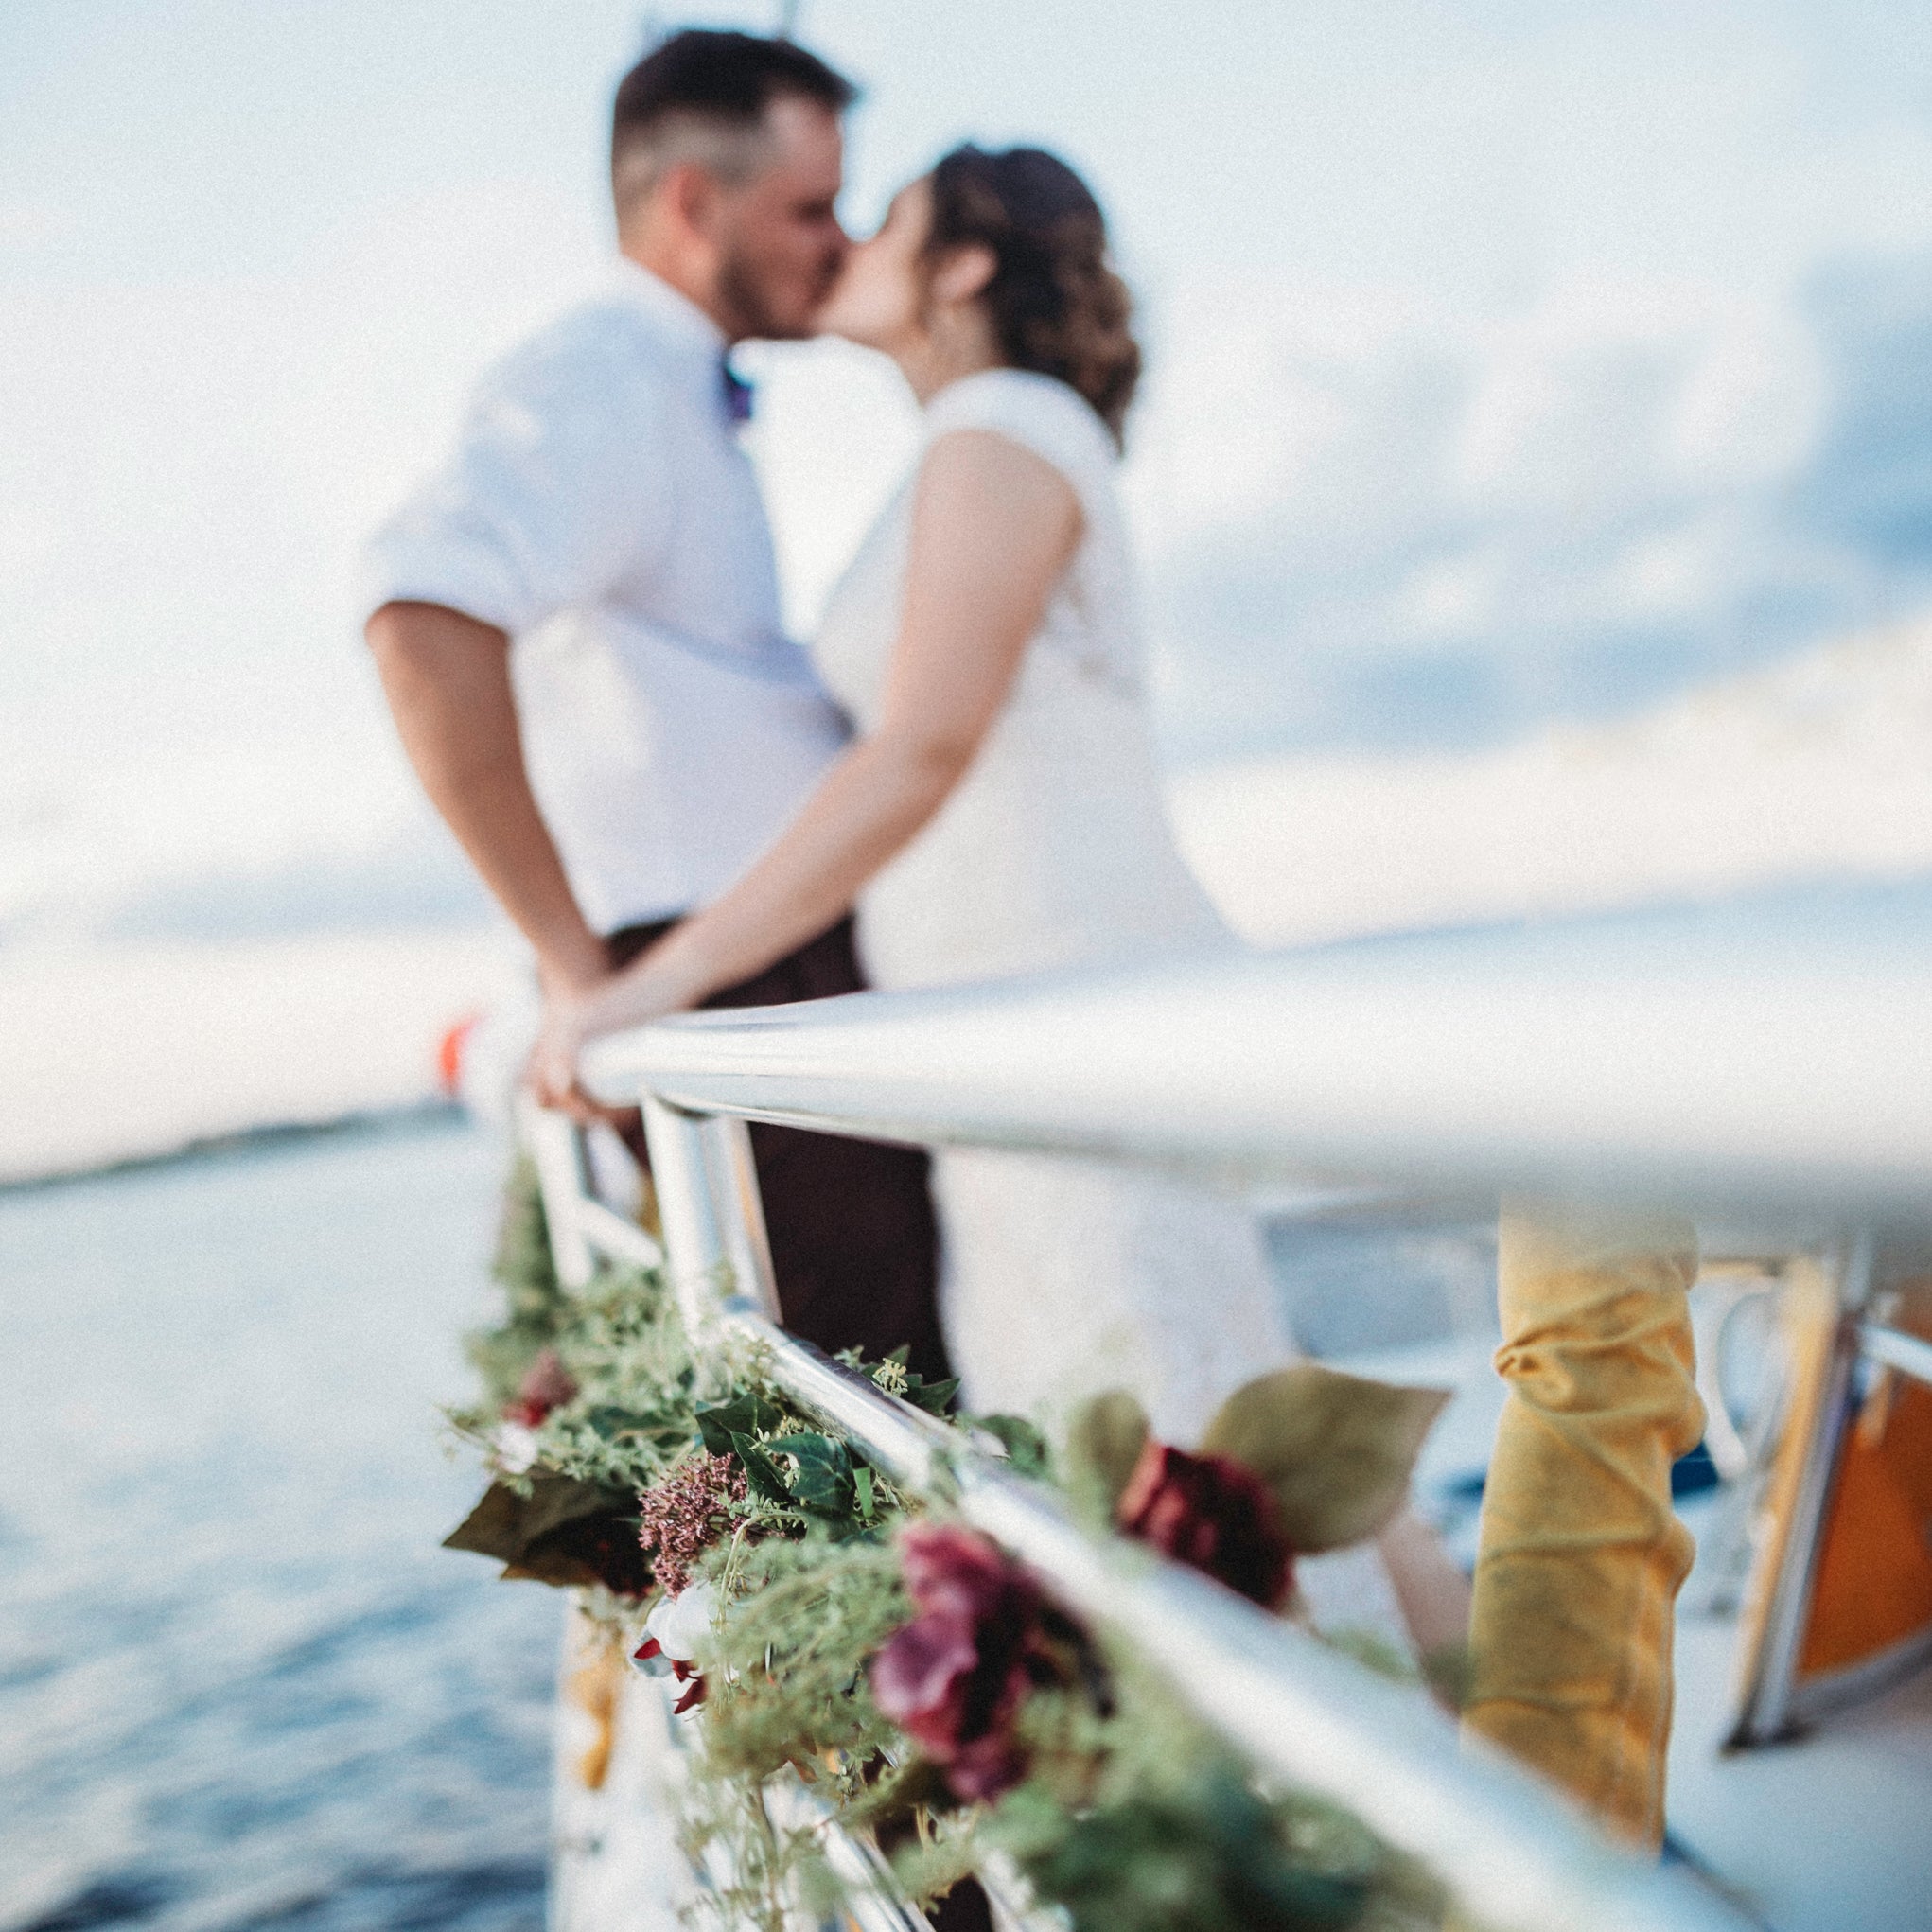 Sunset Cruise Wedding Package (All Inclusive) - The Wedding Shop